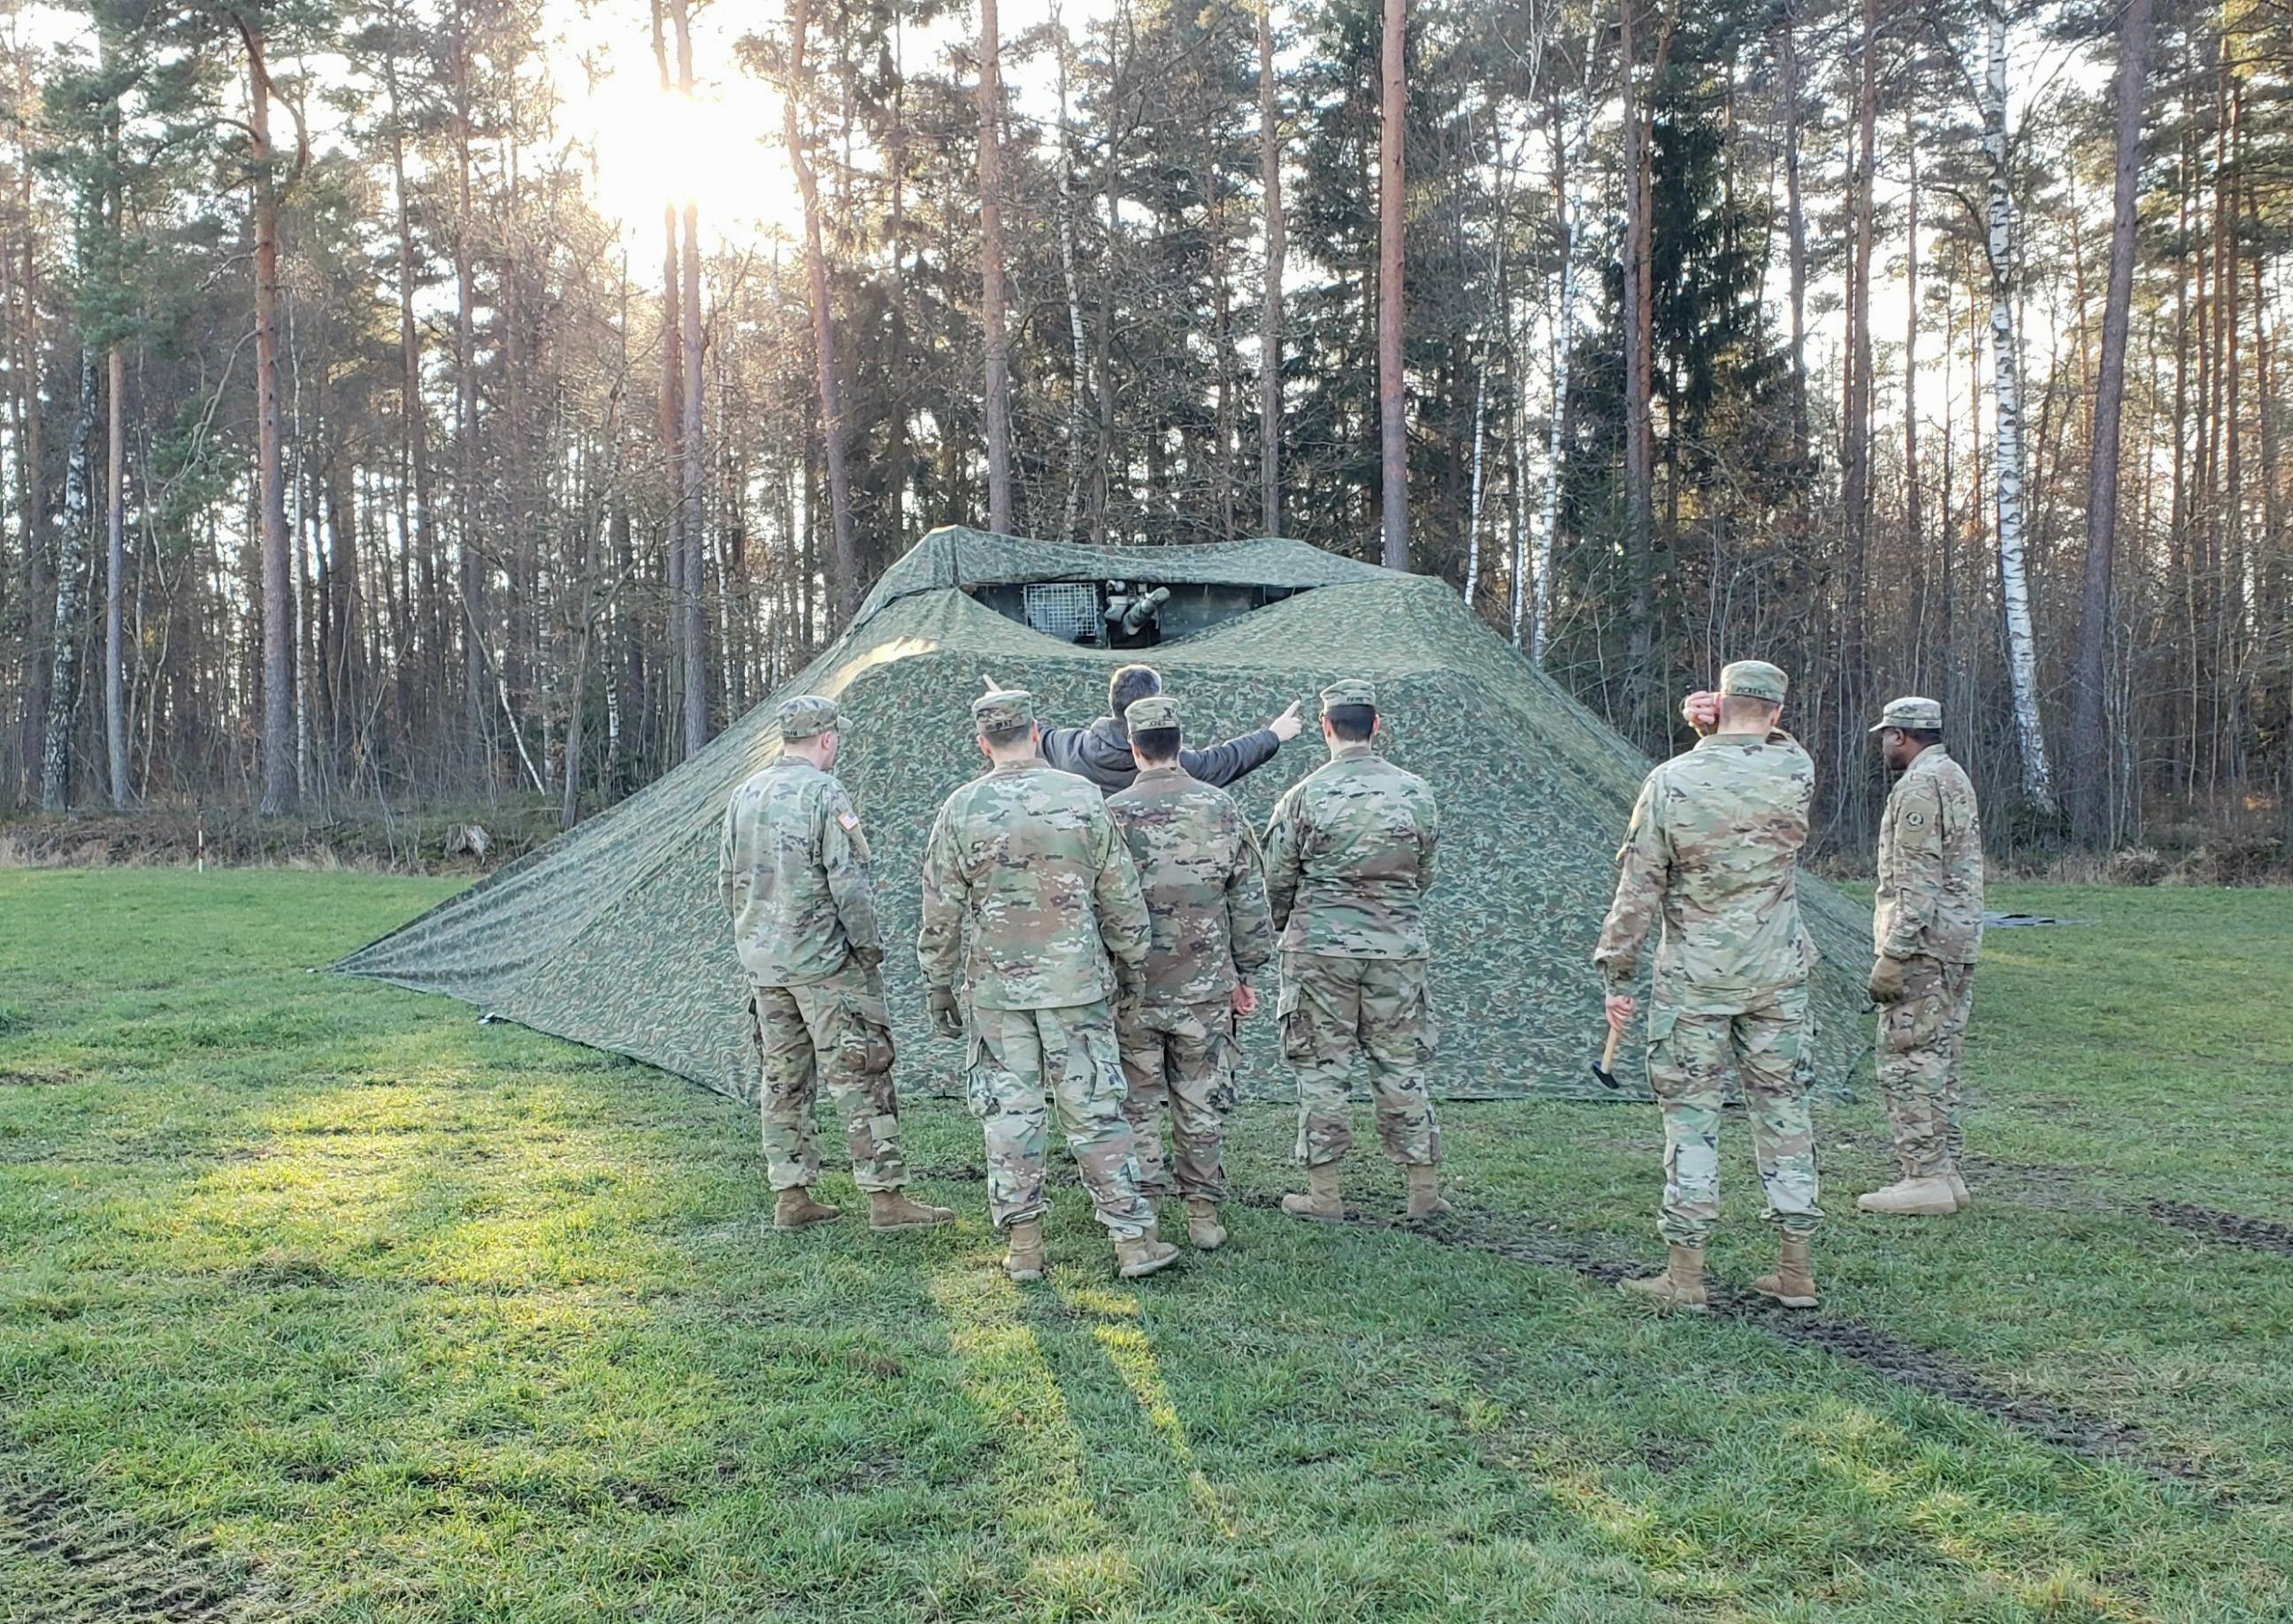 Soldiers with camo netting